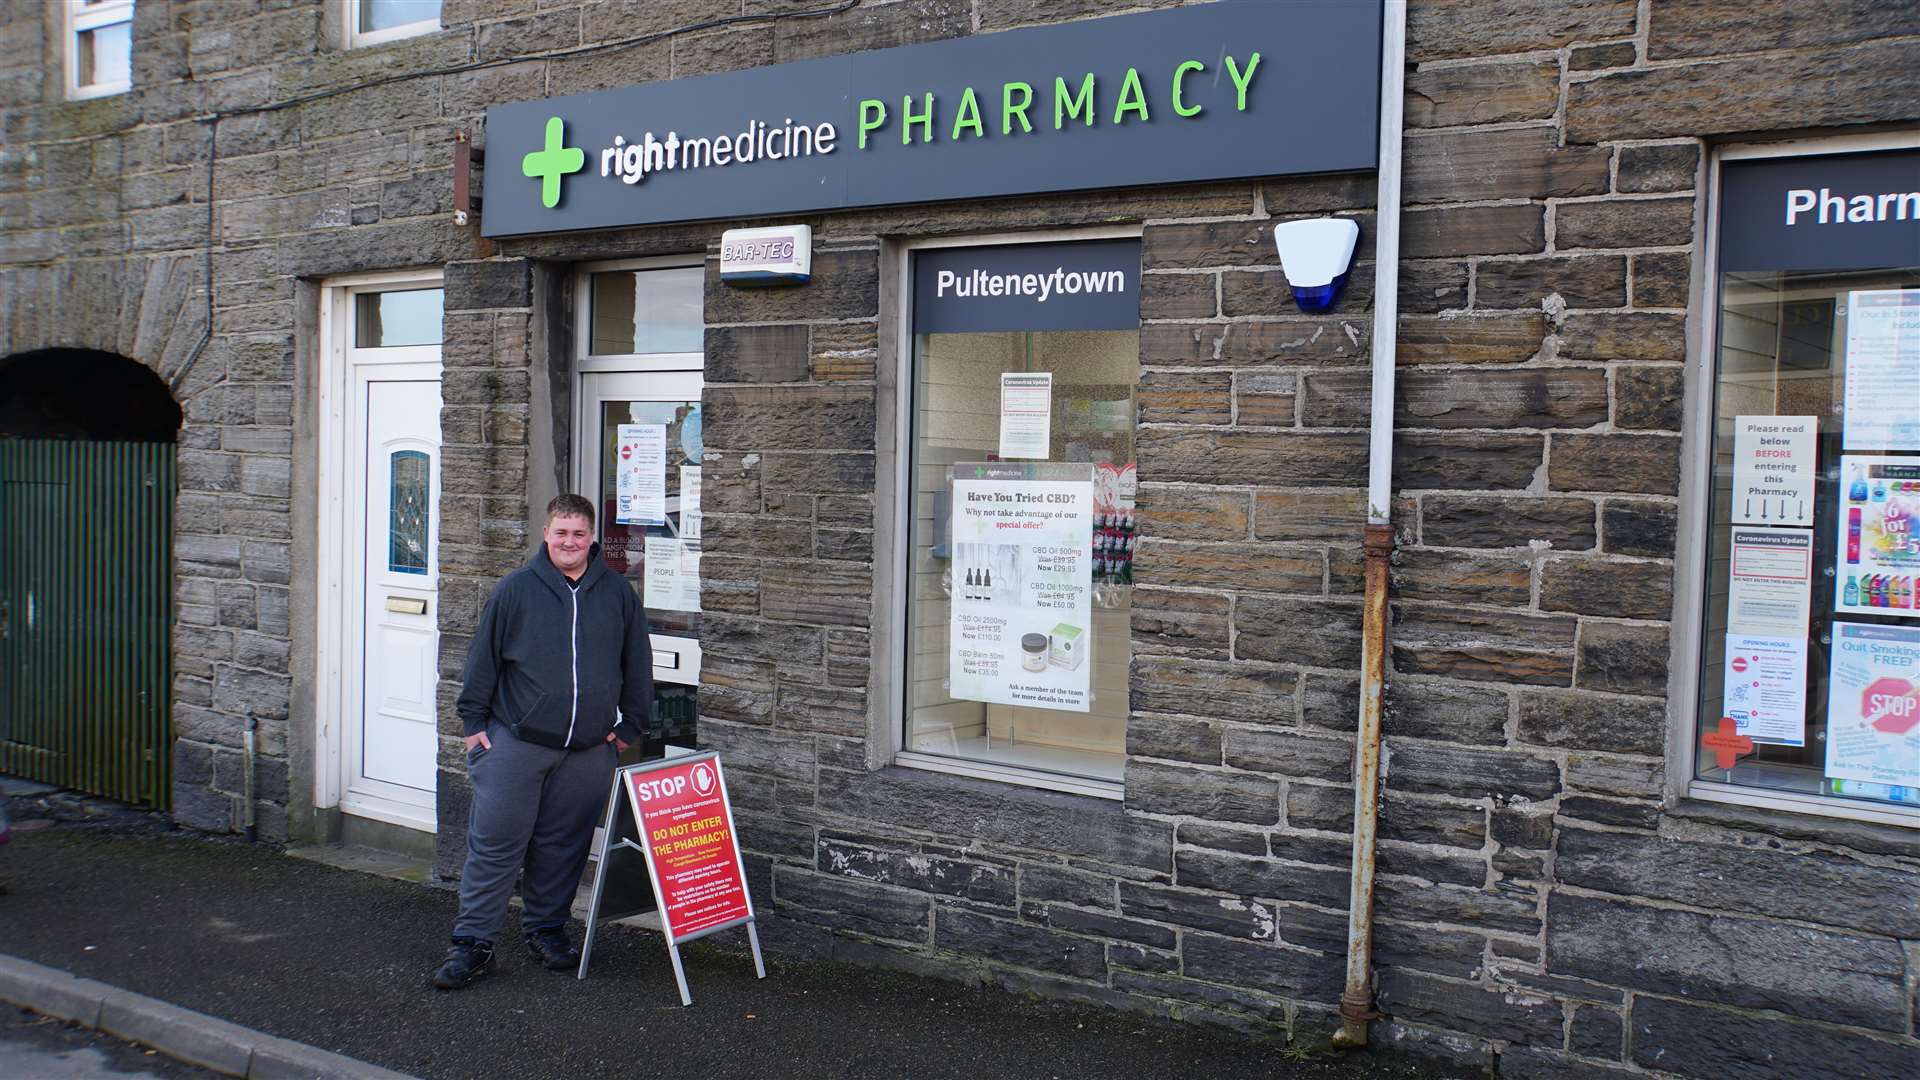 Customers at Pulteneytown Pharmacy have to follow strict guidelines posted on the door.